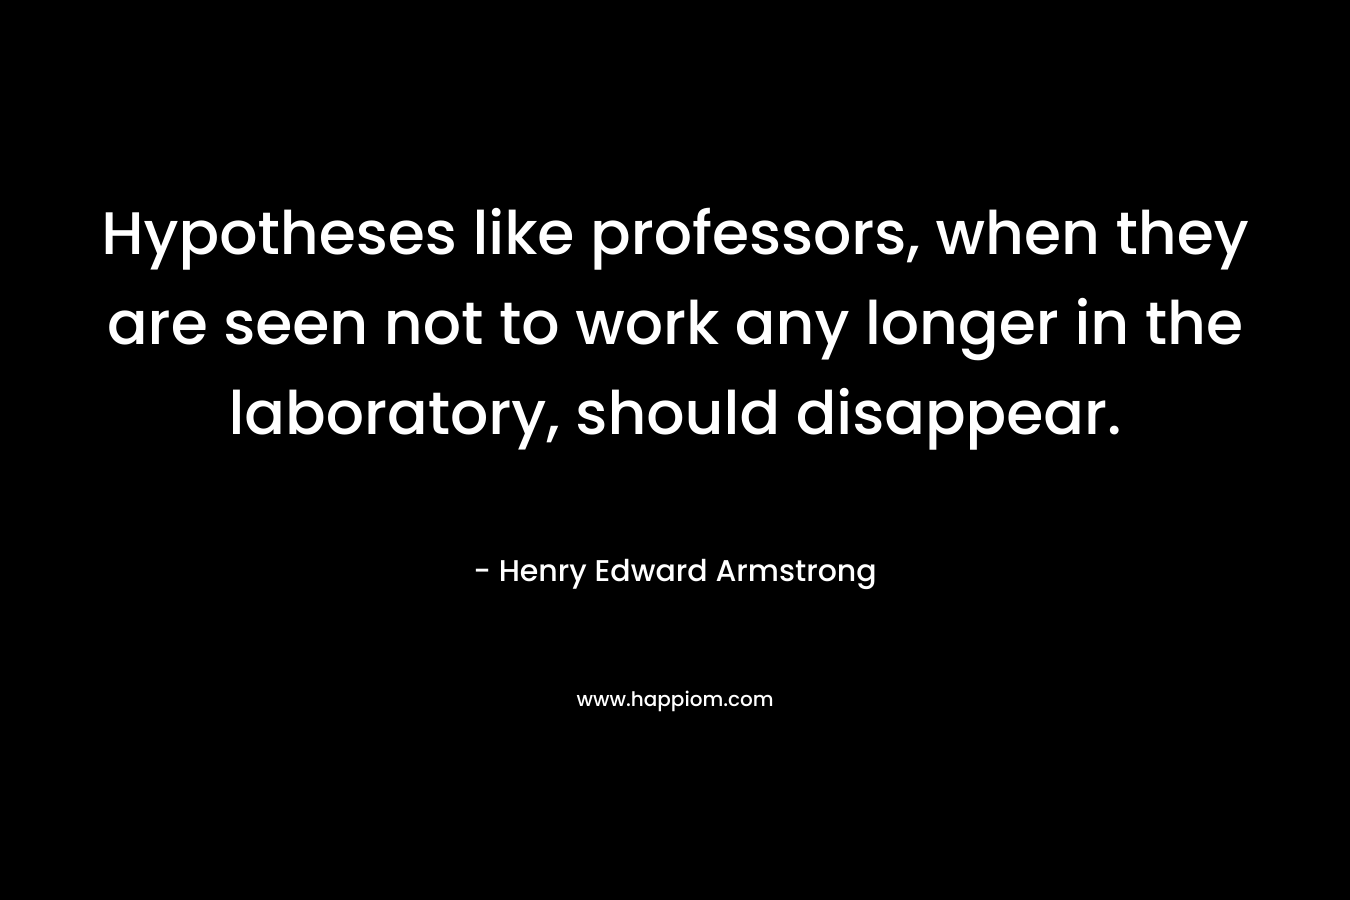 Hypotheses like professors, when they are seen not to work any longer in the laboratory, should disappear. – Henry Edward Armstrong